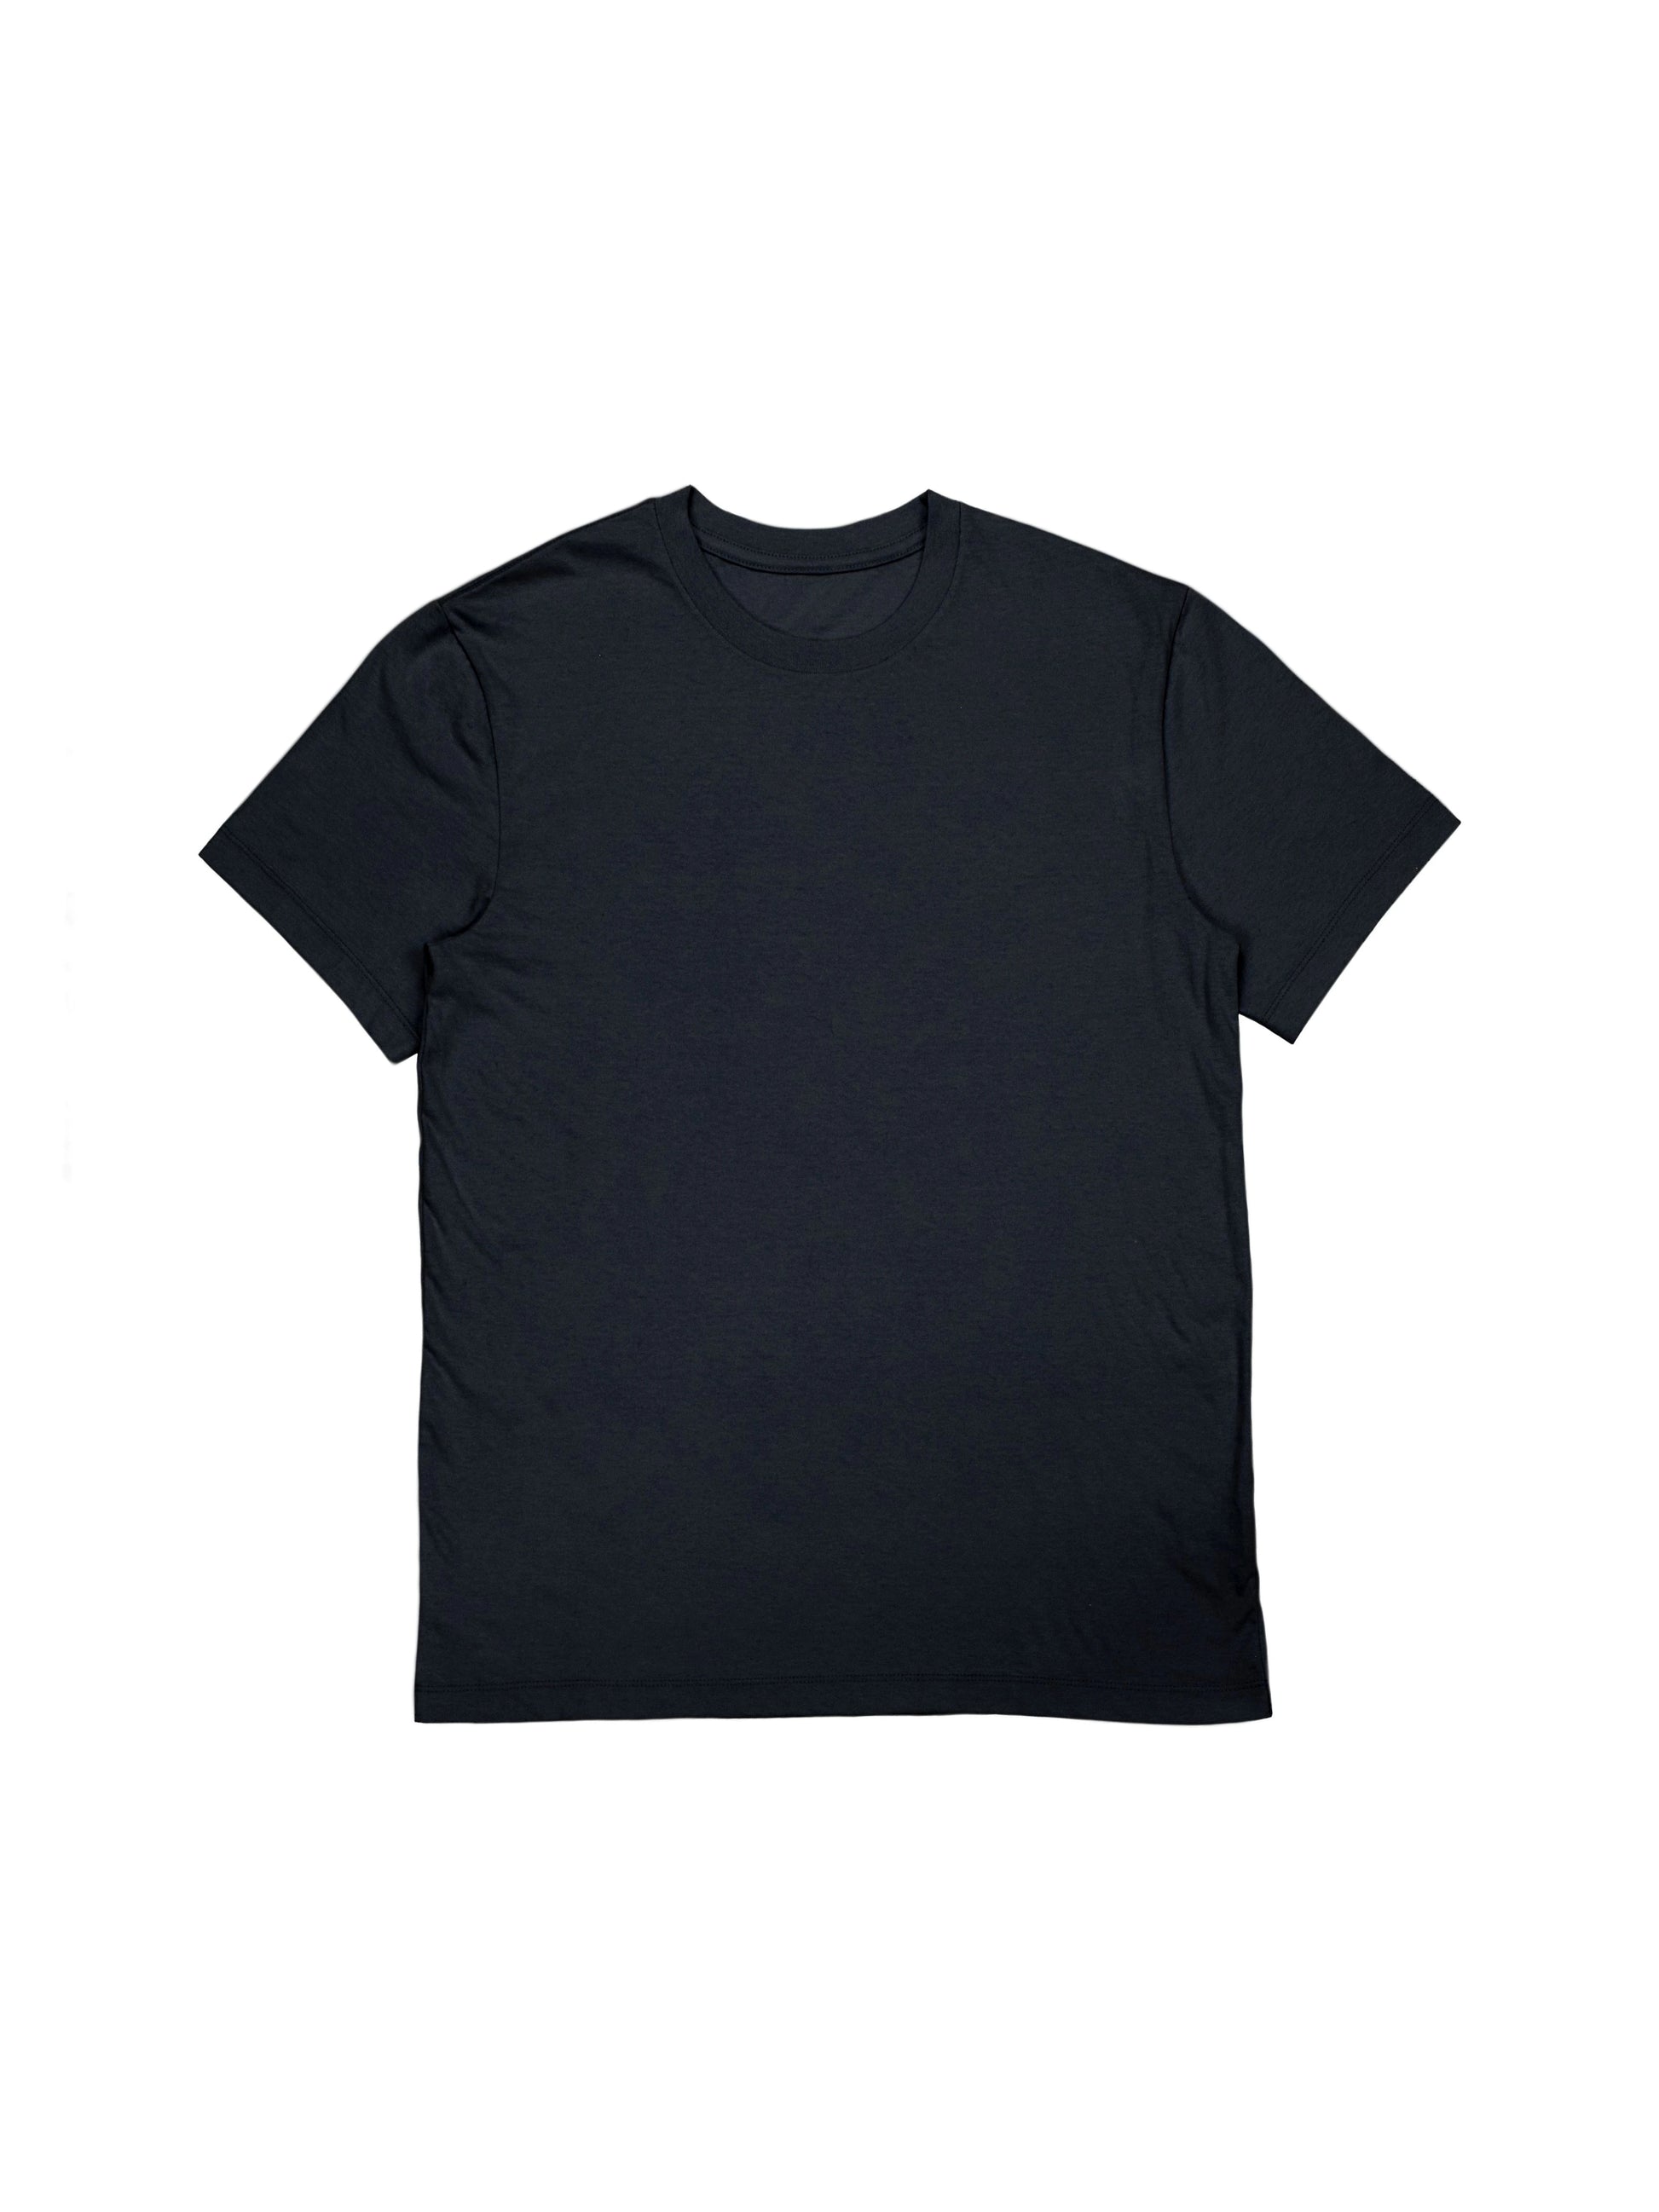 Black T-Shirt in Trendy Boxy Fit